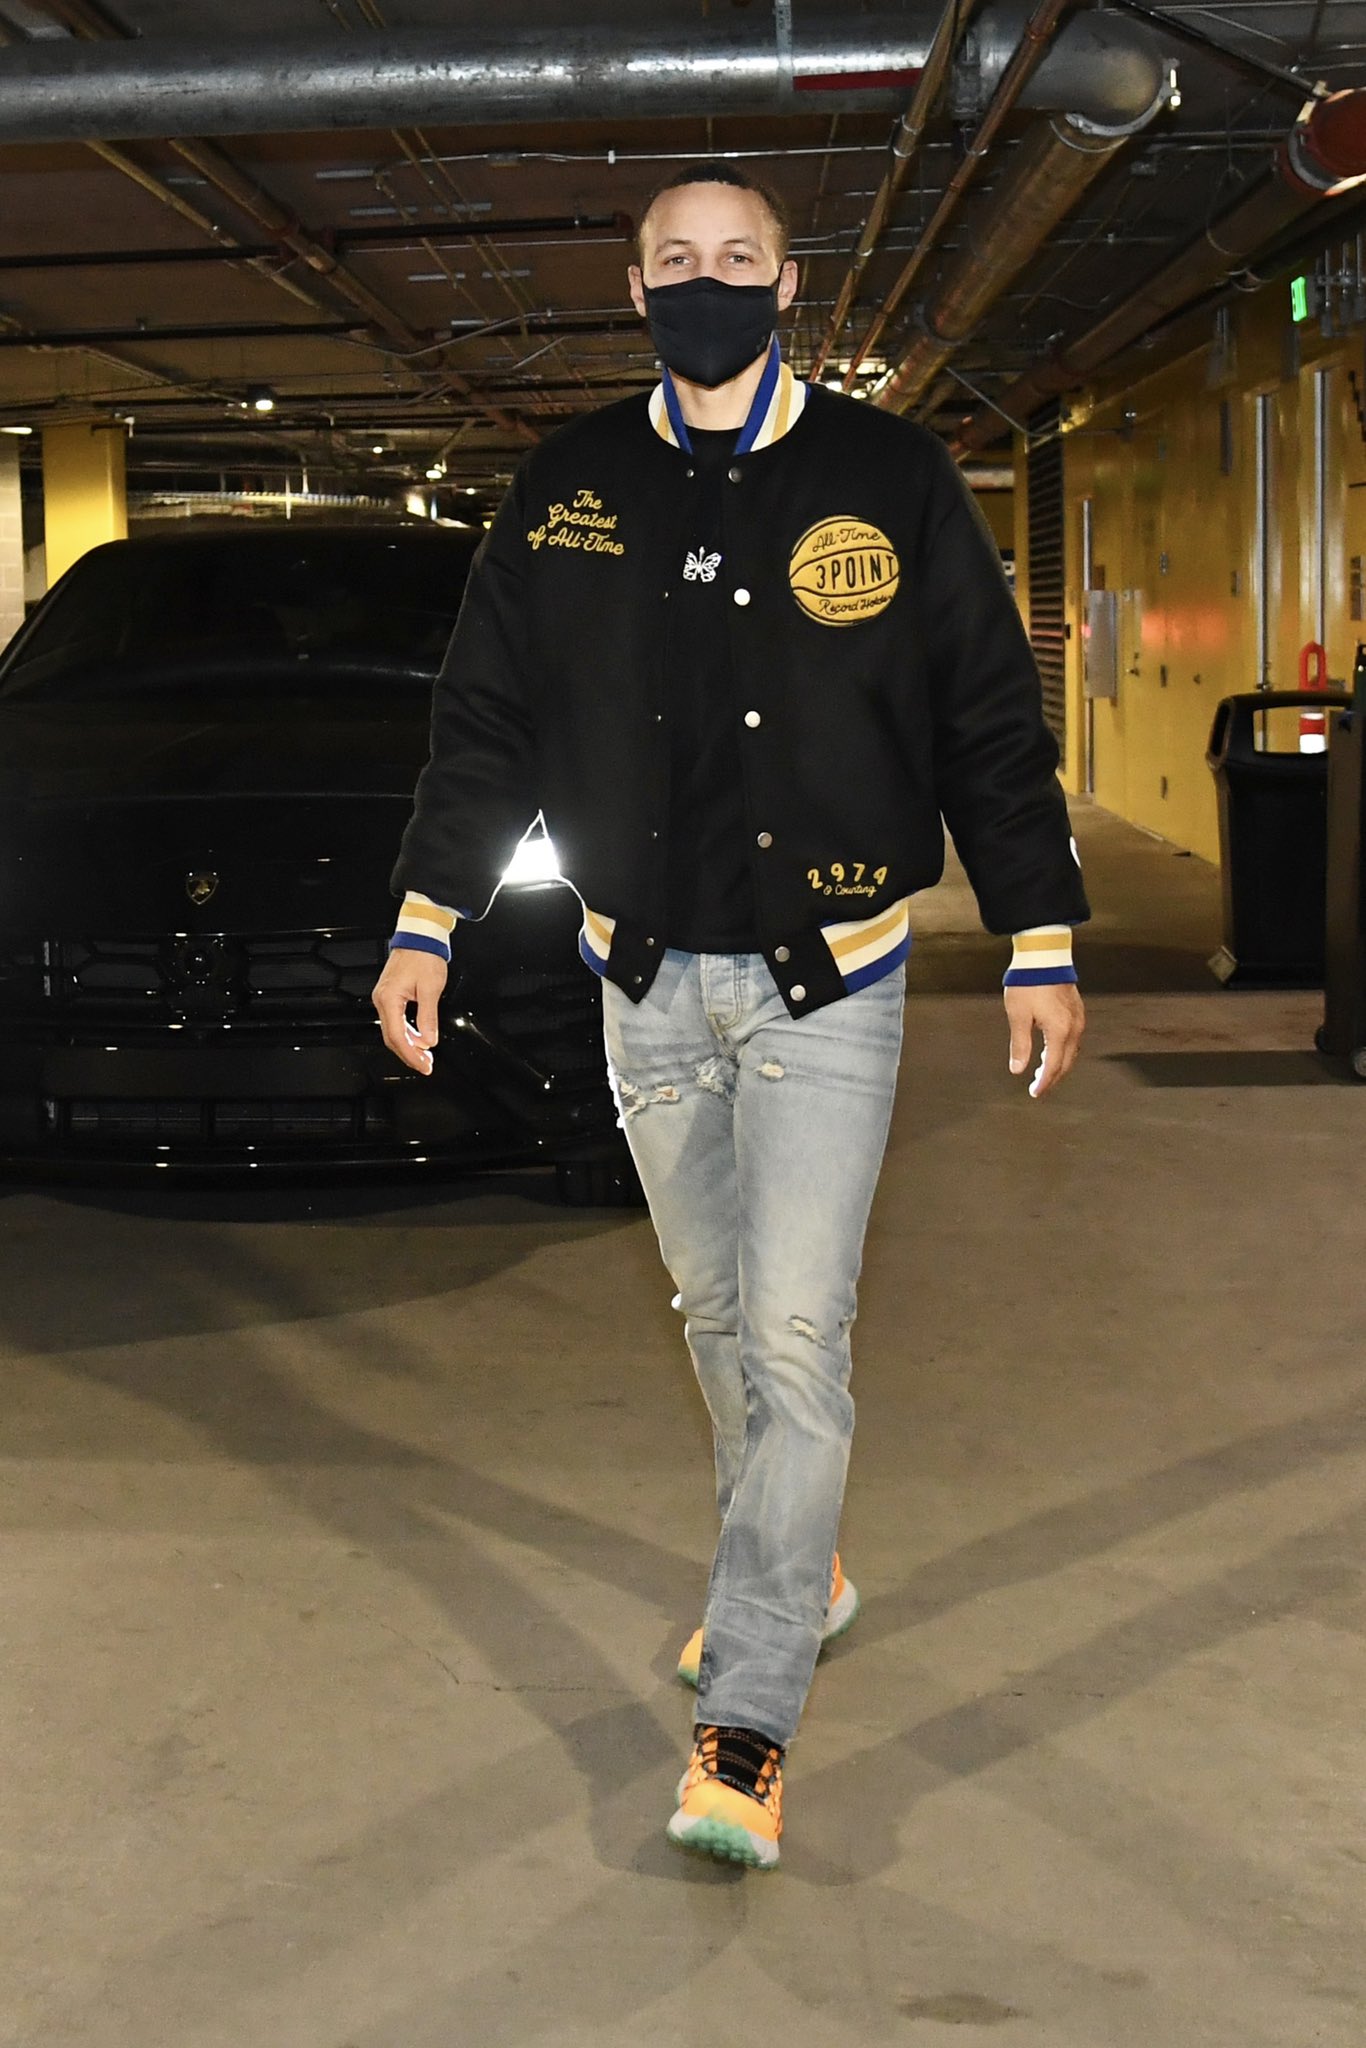 stephen curry jacket